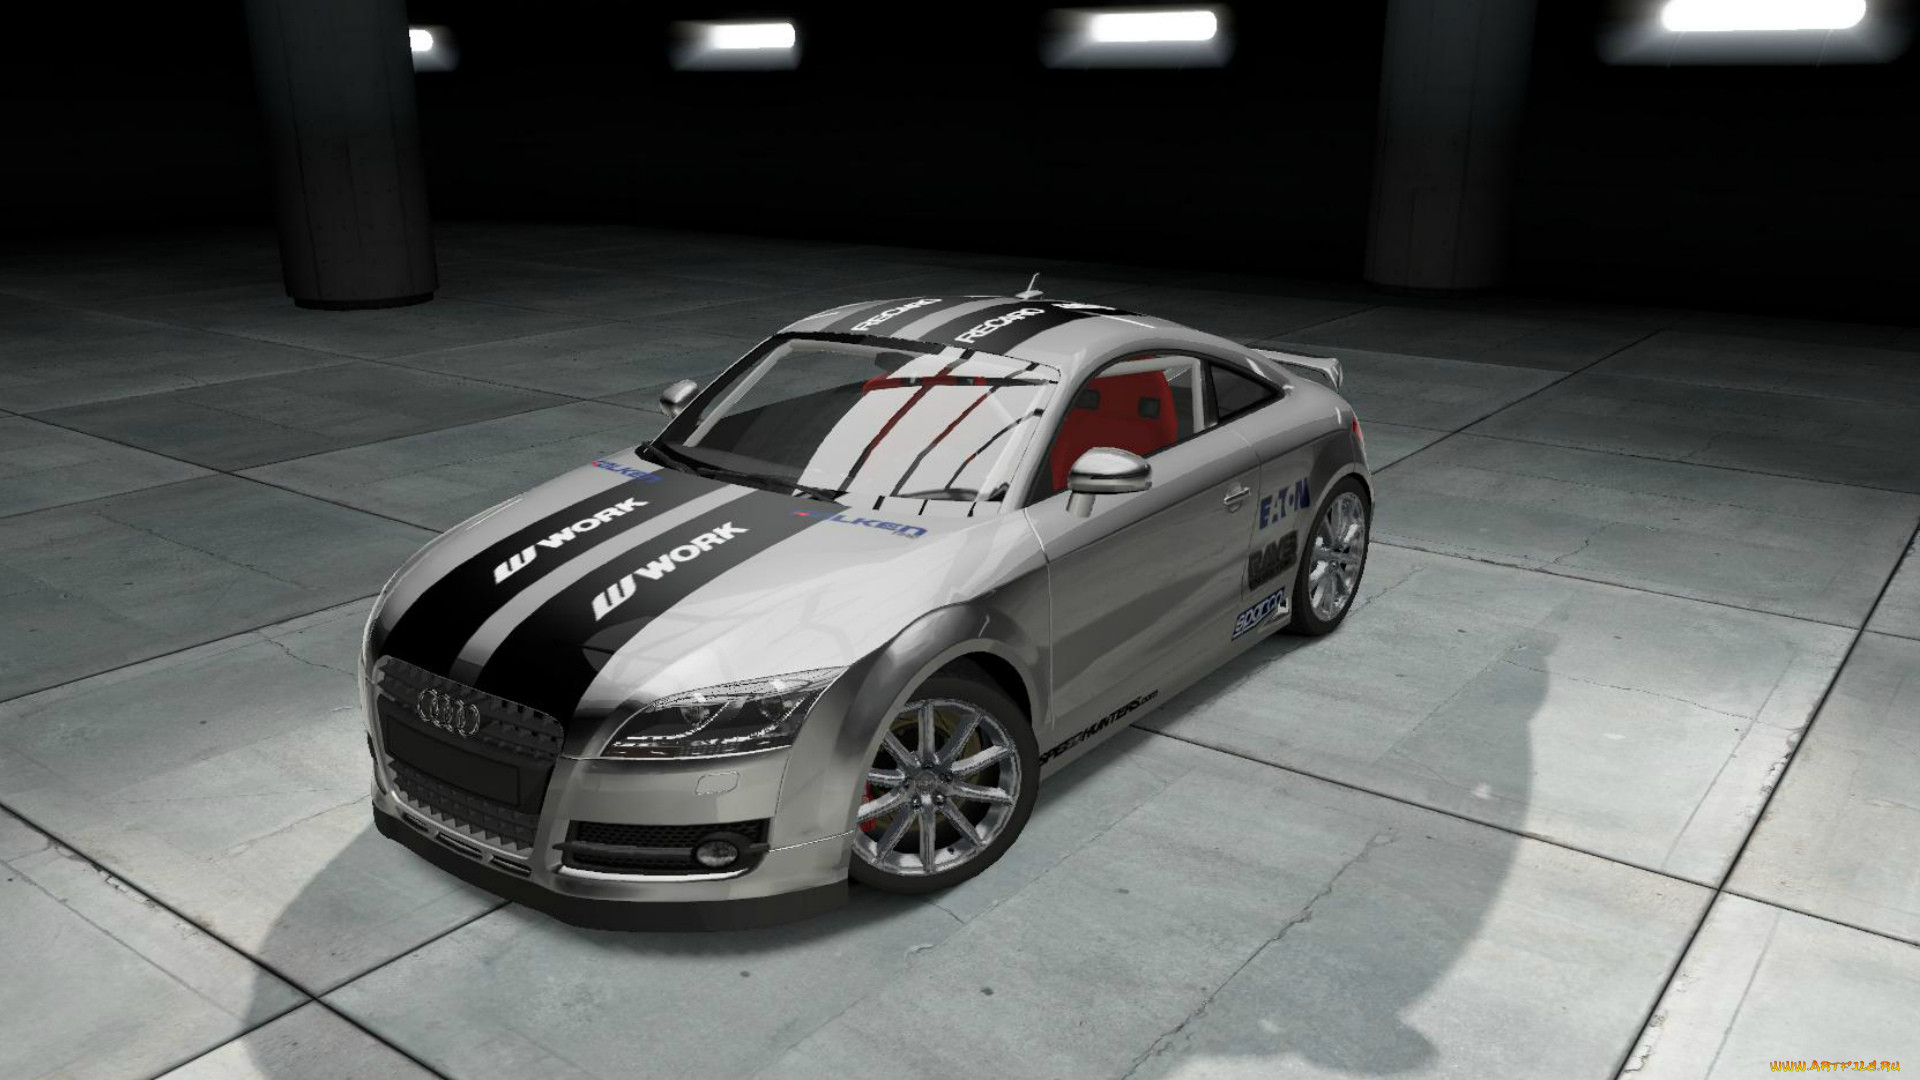 shift 2,  audi tt,  , need for speed,  shift 2 unleashed, audi, tt, shift, 2, unleashed, tunning